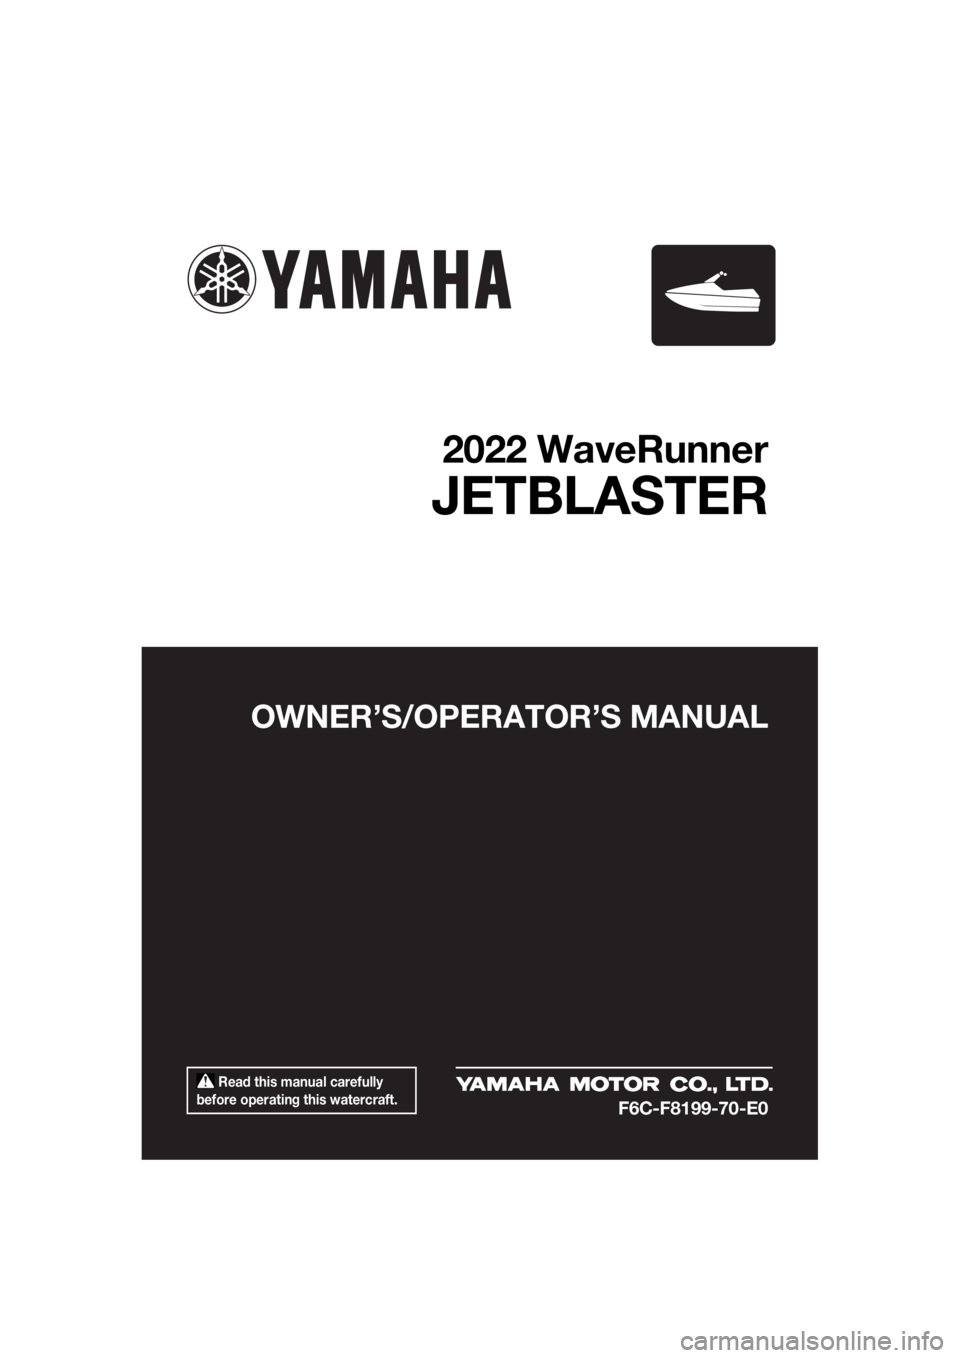 YAMAHA JETBLASTER 2022  Owners Manual  Read this manual carefully 
before operating this watercraft.
OWNER’S/OPERAT OR’S MANUAL
2022 WaveRunner
JETBLASTER
F6C-F8199-70-E0
UF6C70E0.book  Page 1  Friday, December 10, 2021  2:13 PM 